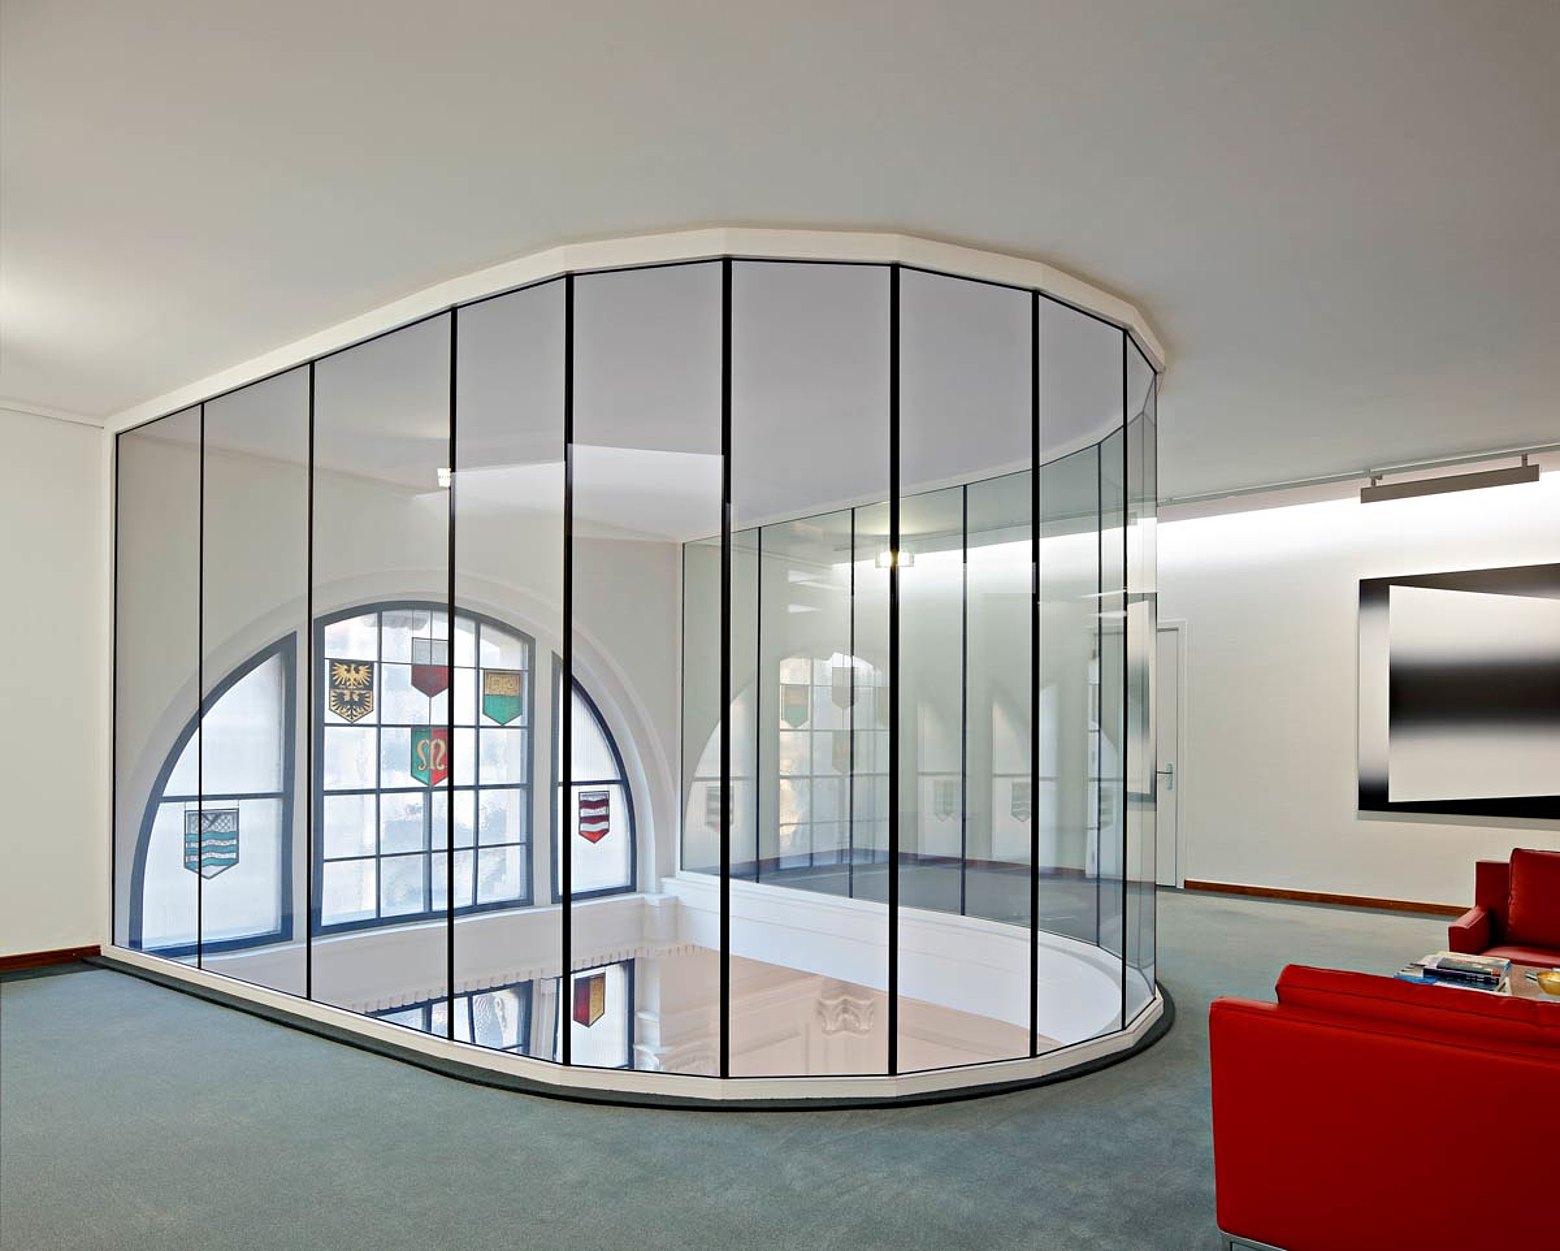 Fire-resistant glazing EI30 glass-to-glass joint, arranged in a semicircle, profile system forster fuego light
Bank Cantonale Vaudoise, Lausanne
